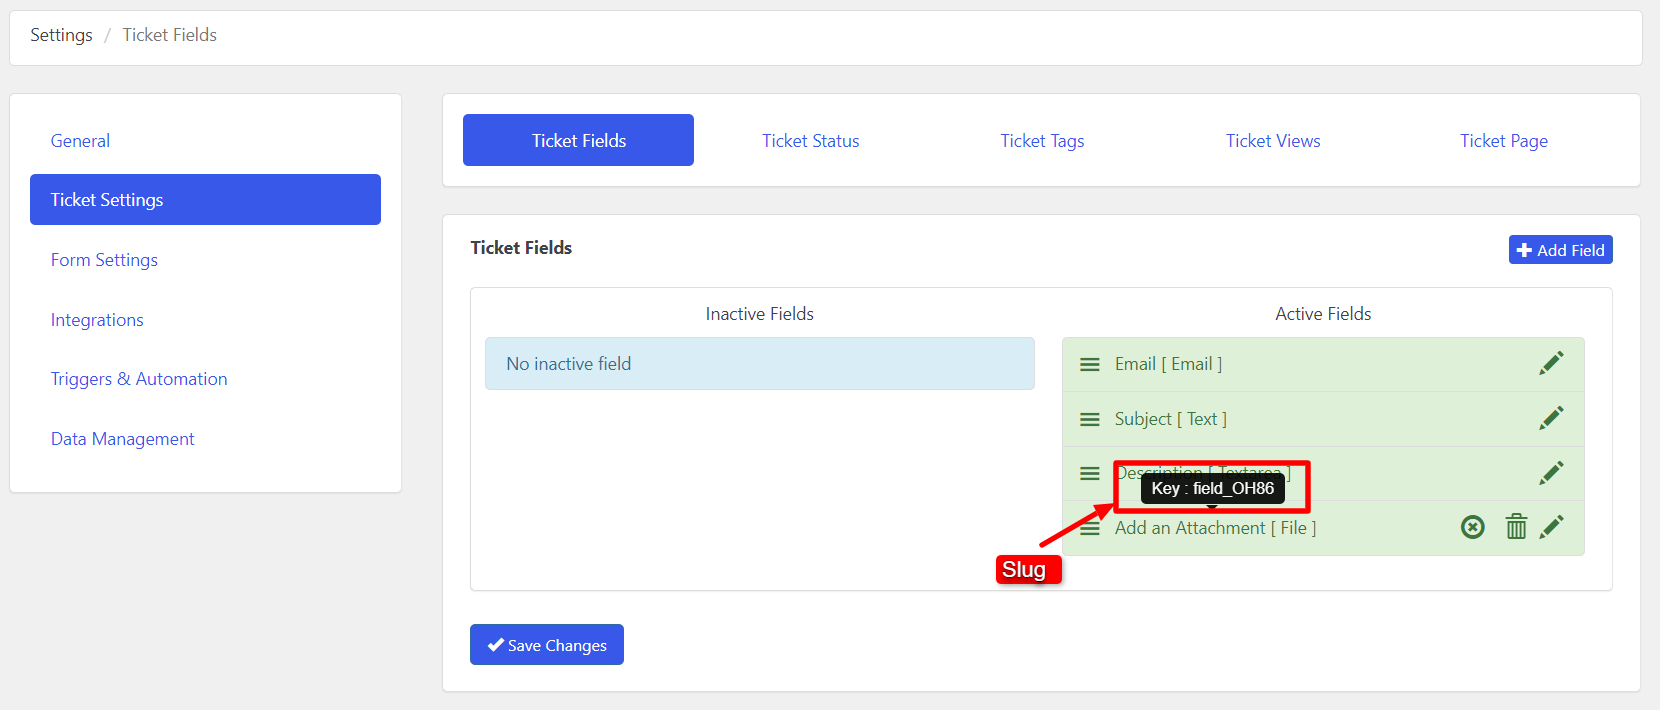 Showing details from additional fields on existing request tickets